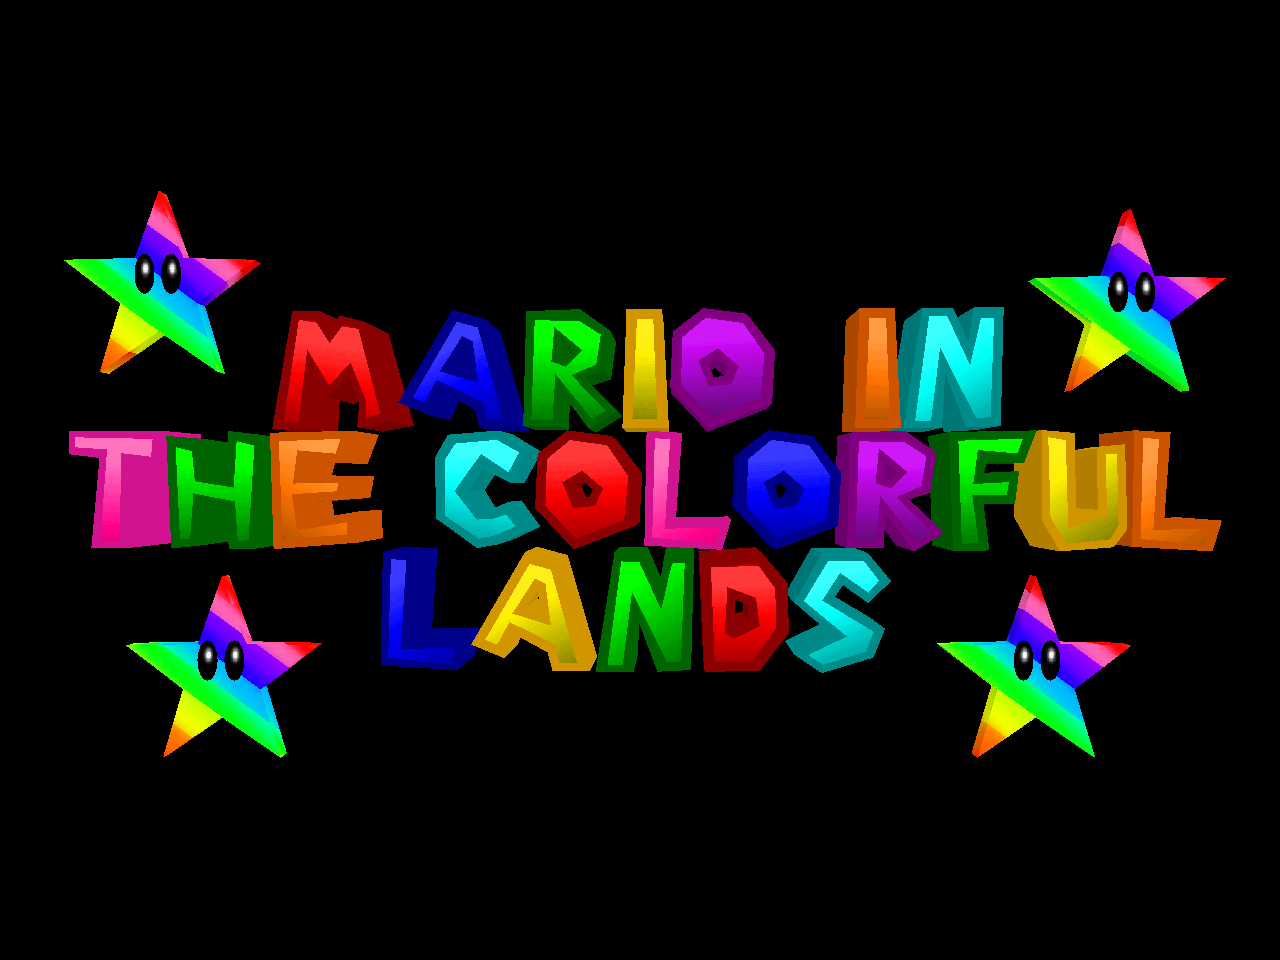 Mario In The Colorful Lands (BlueToonYoshi).png